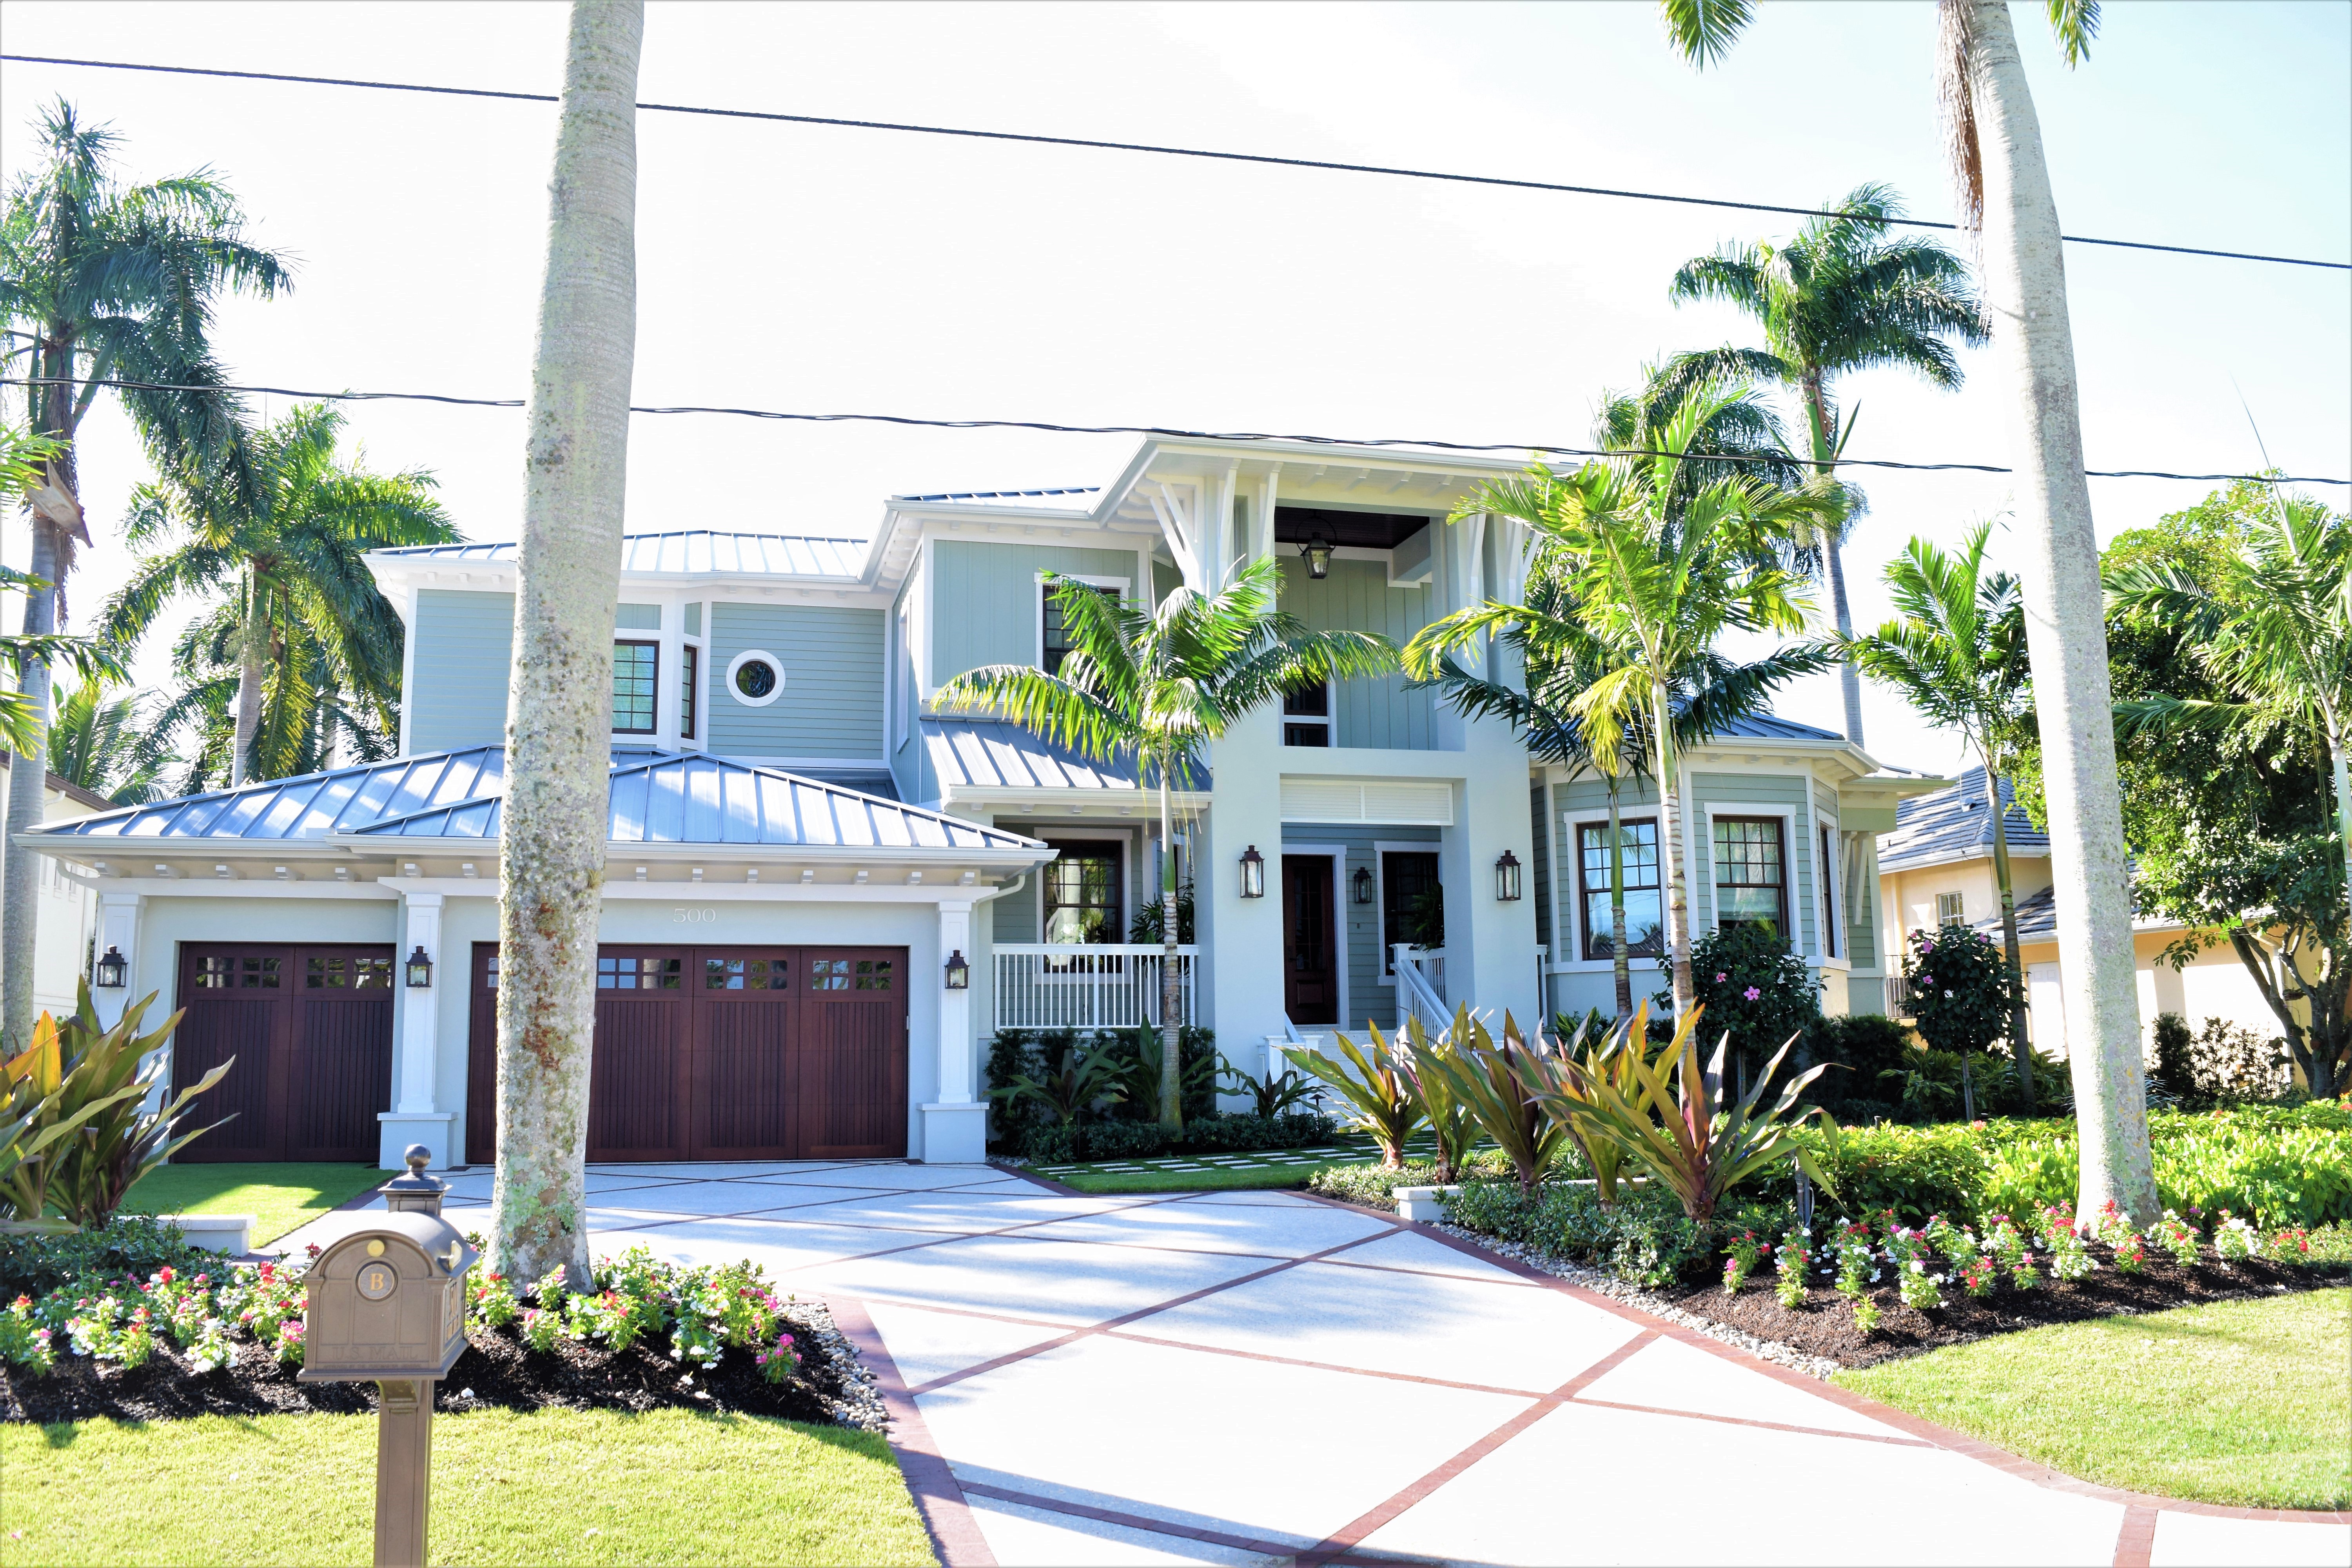 Residential Property Management in and near Collier County Florida